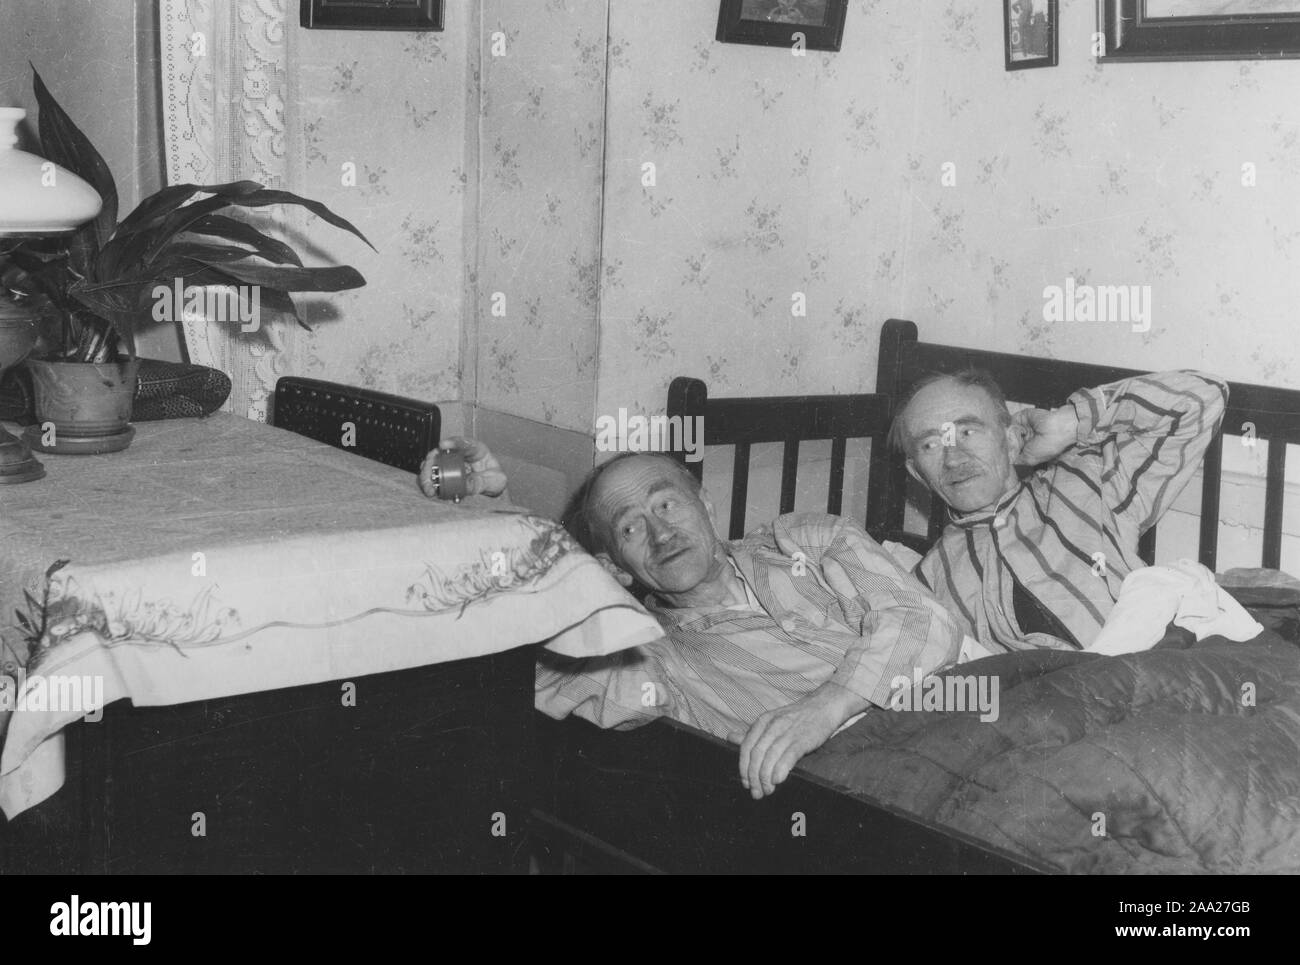 Identical twins. The brothers Erik and Otto Nilsson from Malmö. They both work as painters and is woken up by the alarm clock. Sweden 1950s Stock Photo